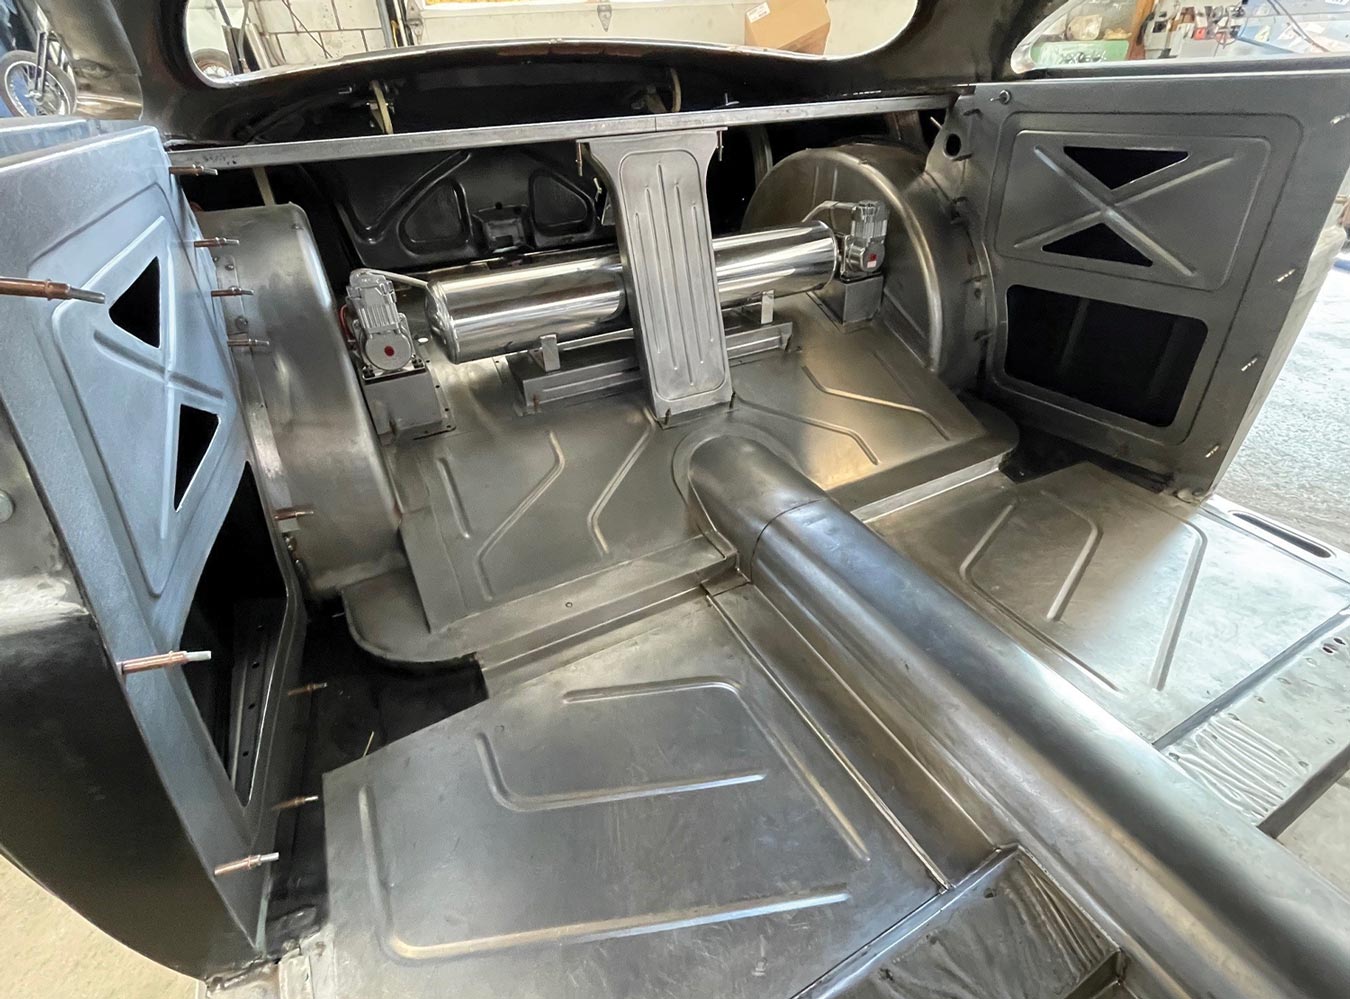 view of the back seat area with the strong brace for the package shelf in place along with the mounts for the air tank for the Ridetech suspension